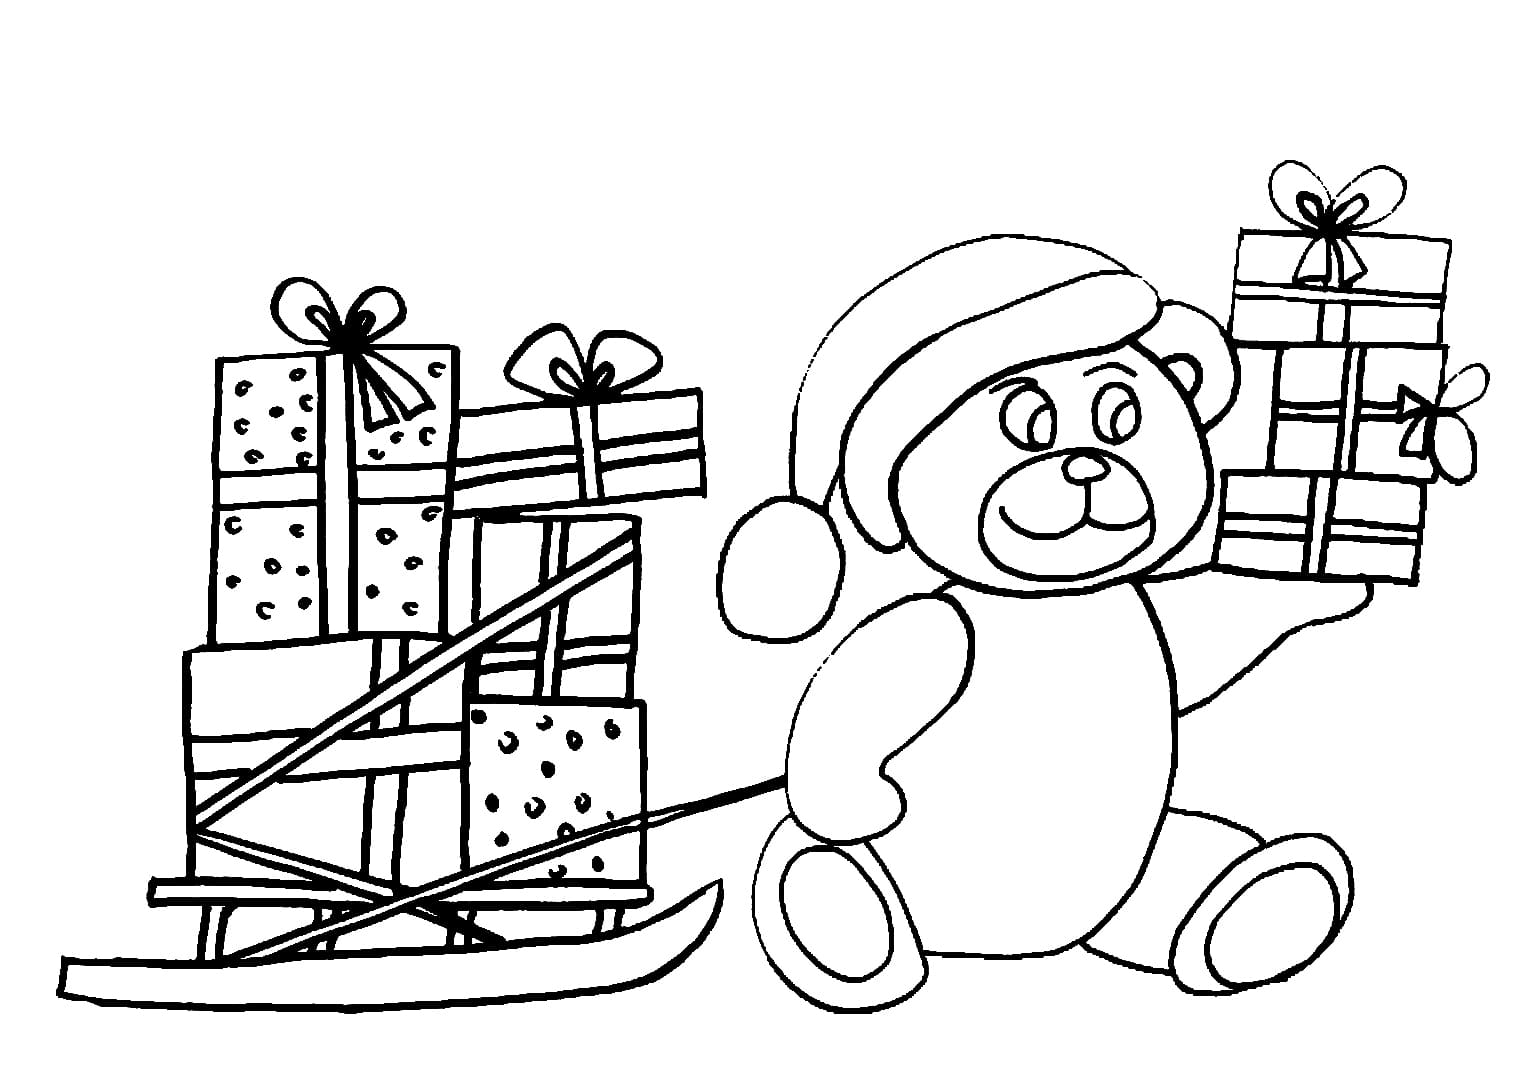 Happy New Year Coloring Pages. Print for free   WONDER DAY ...